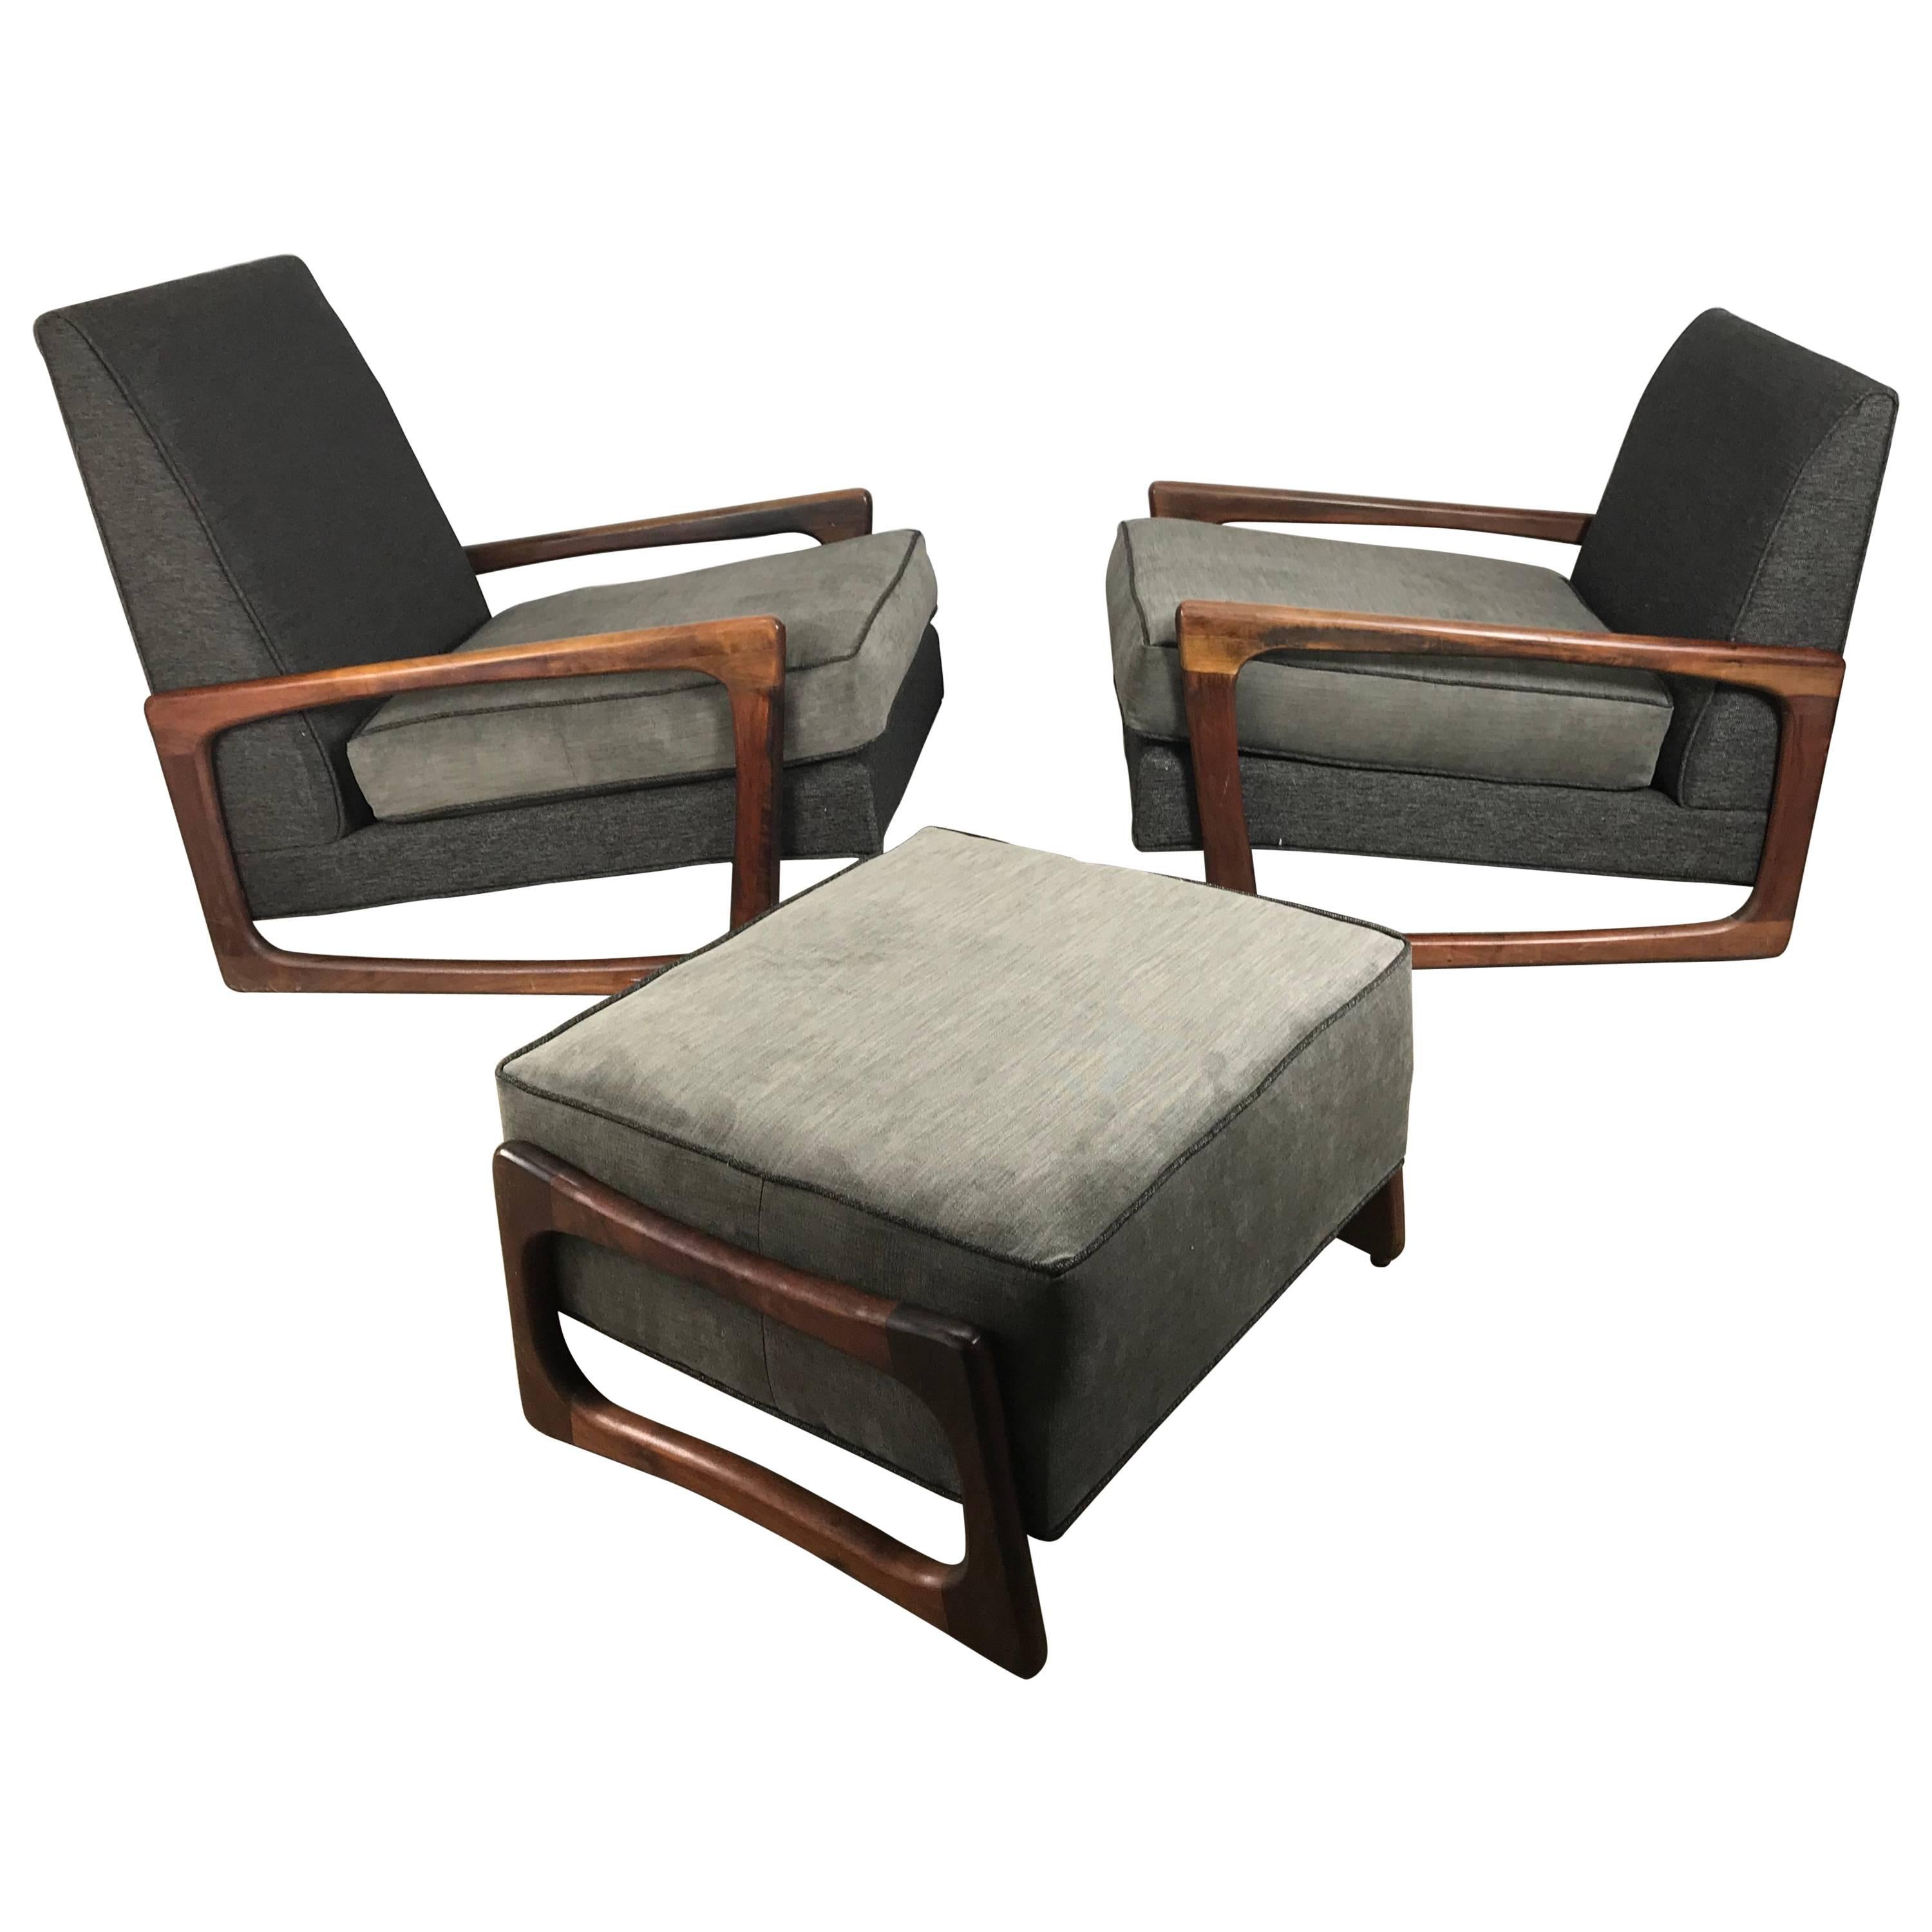 Stunning Classic Modernist Sculptural Lounge Chairs and Ottoman Adrian Pearsall